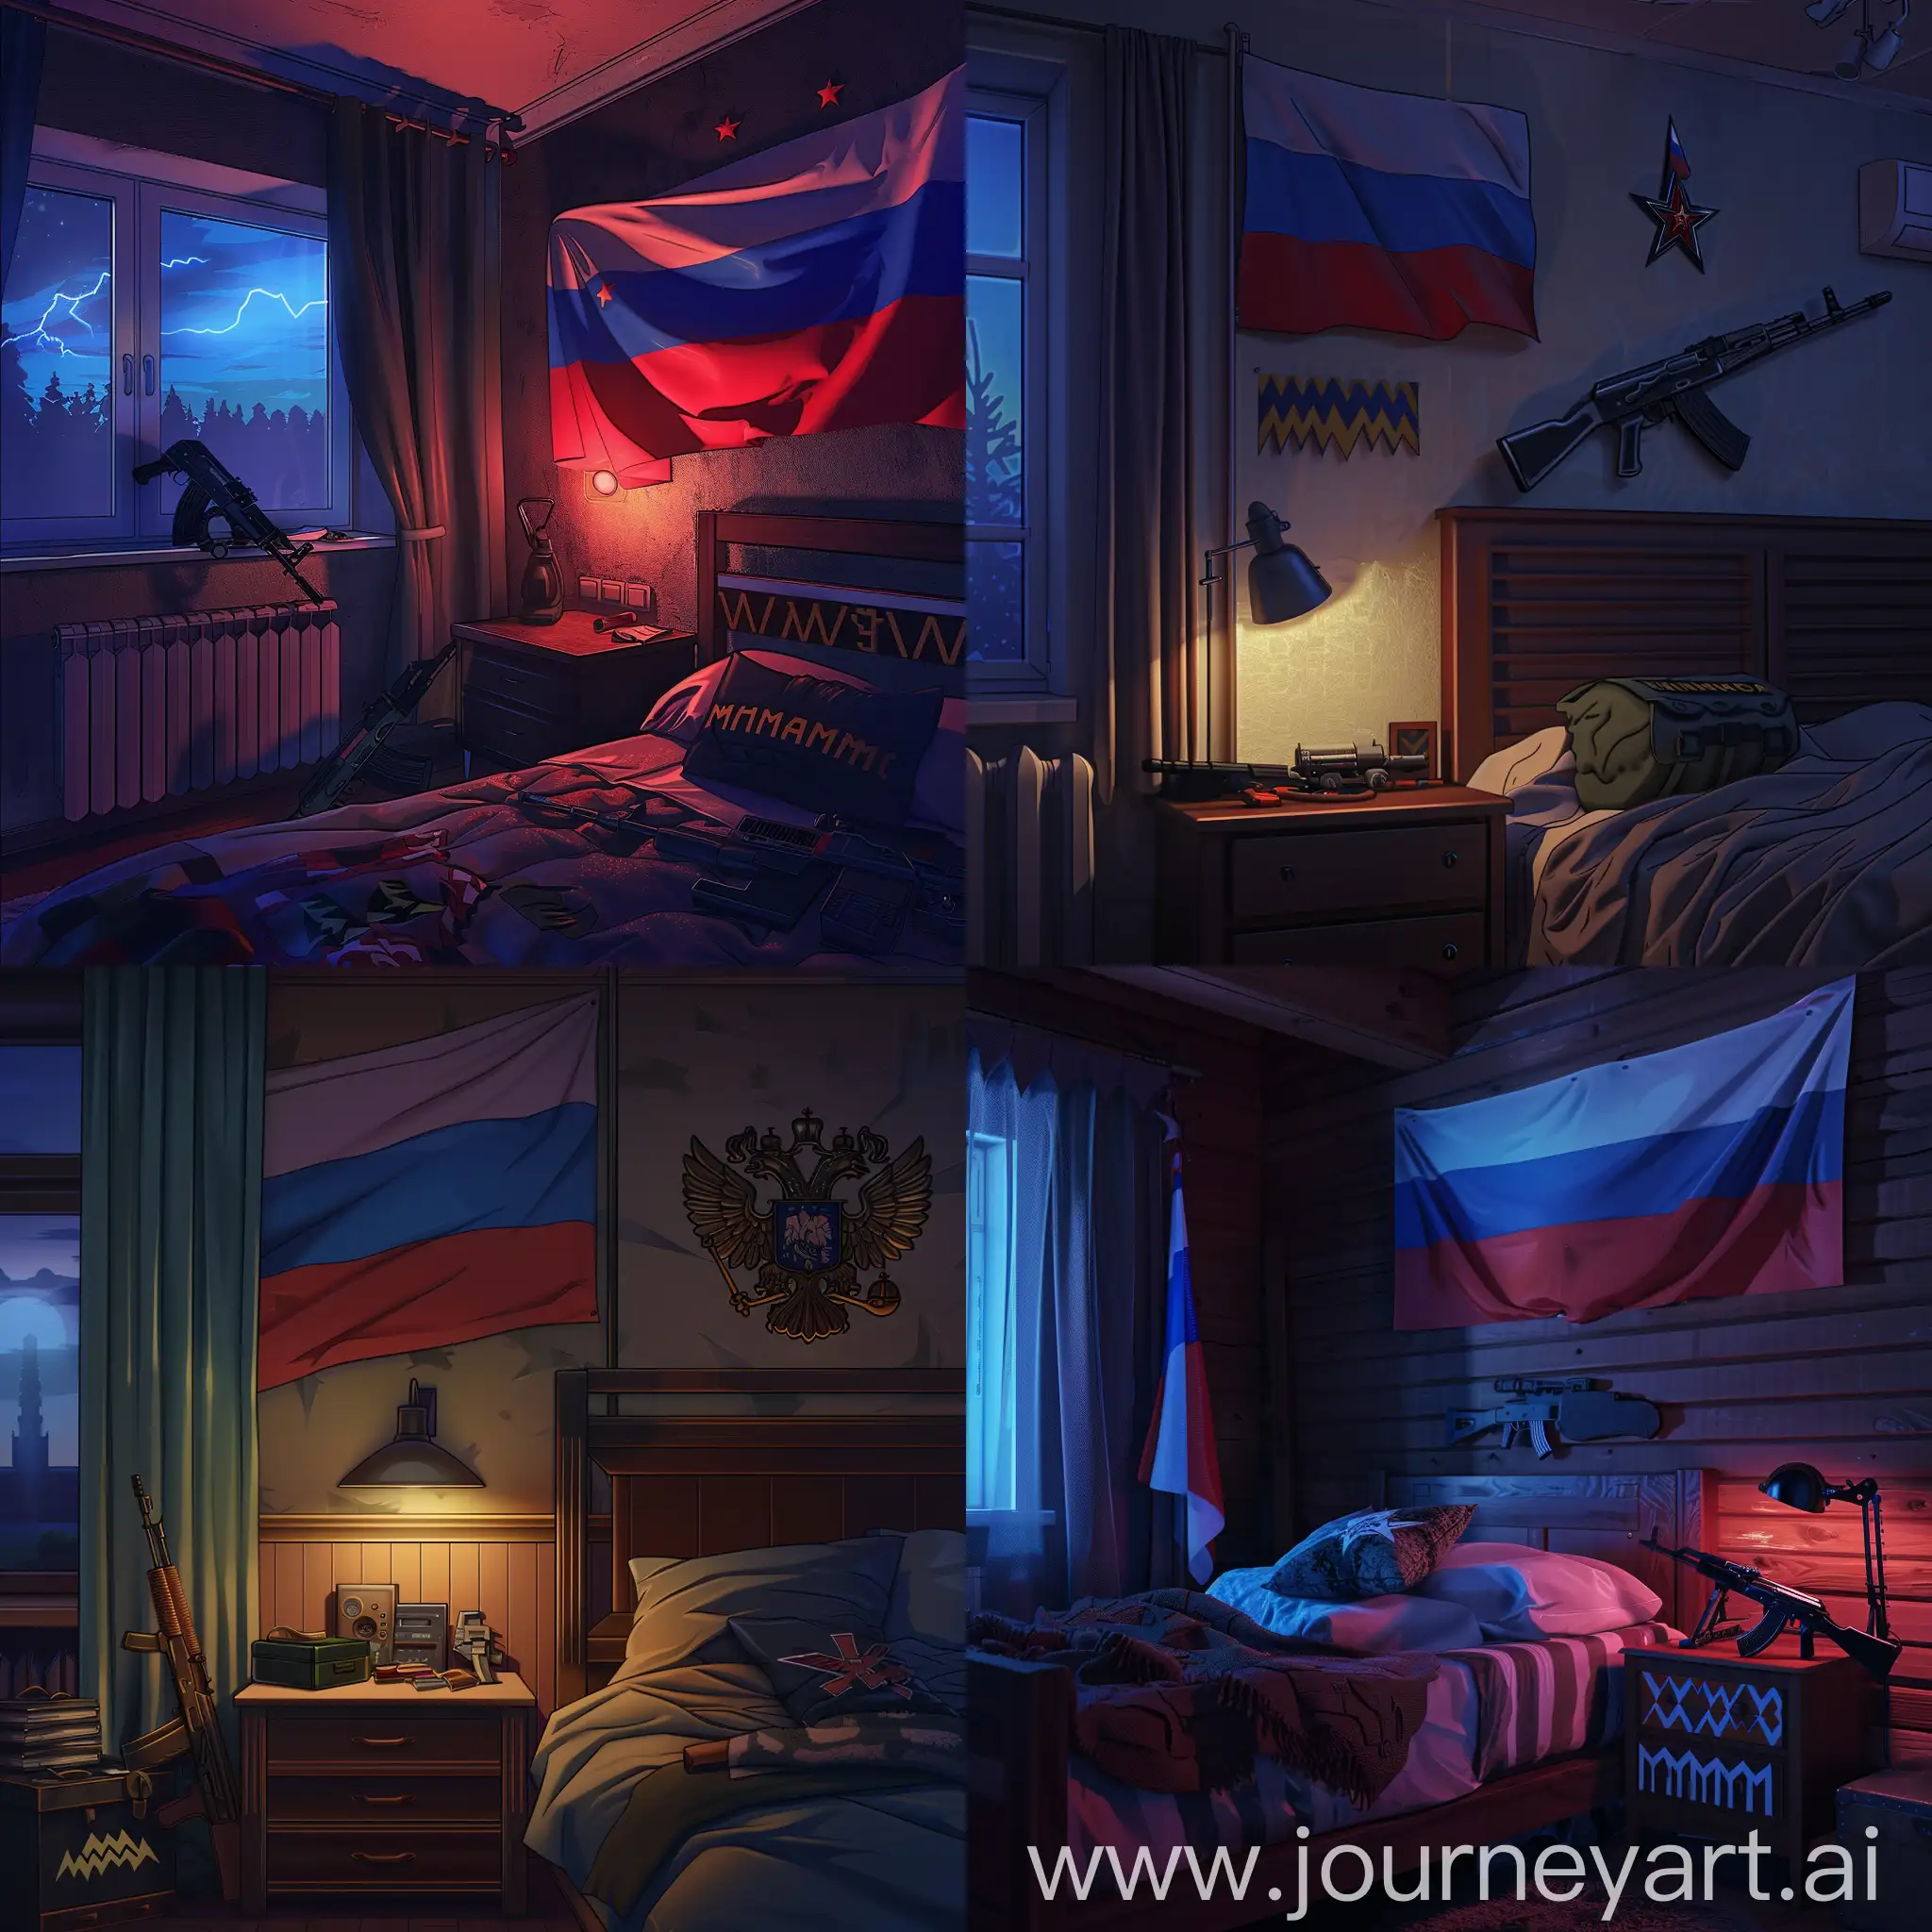 Russian-Bedroom-Scene-with-Anime-Style-and-Military-Motifs